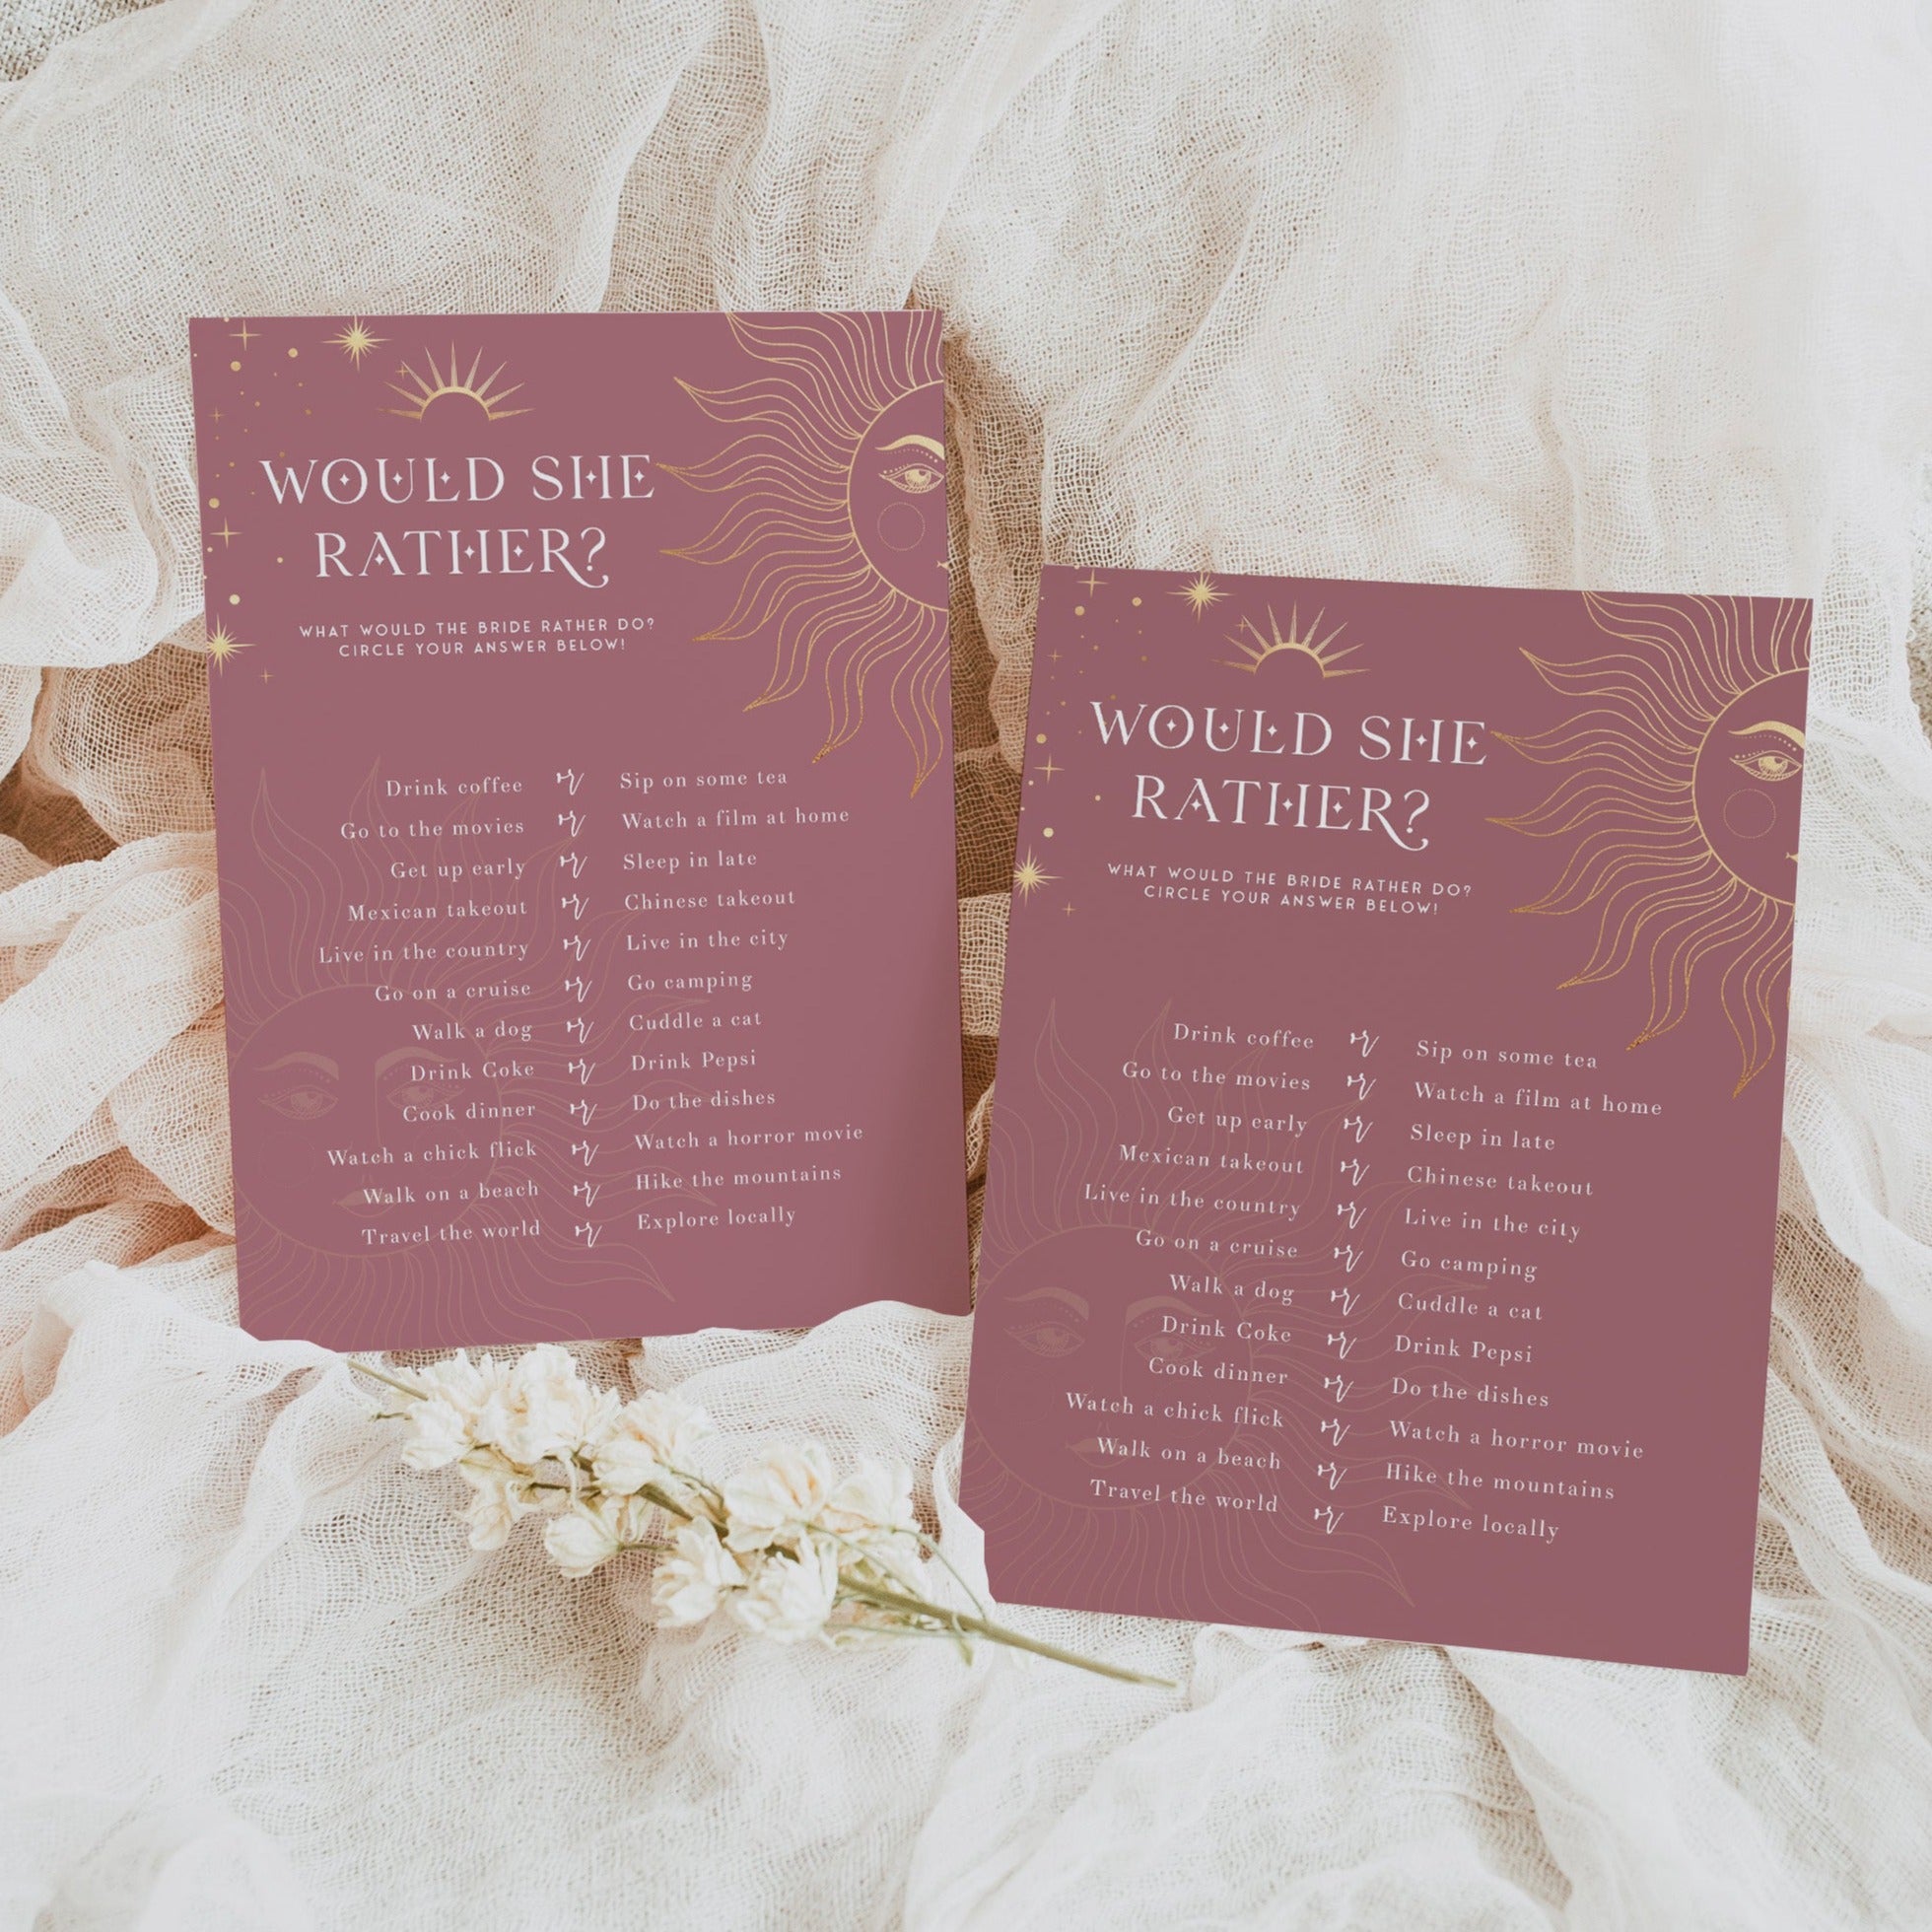 Fully editable and printable bridal shower would she rather game with a celestial design. Perfect for a celestial bridal shower themed party